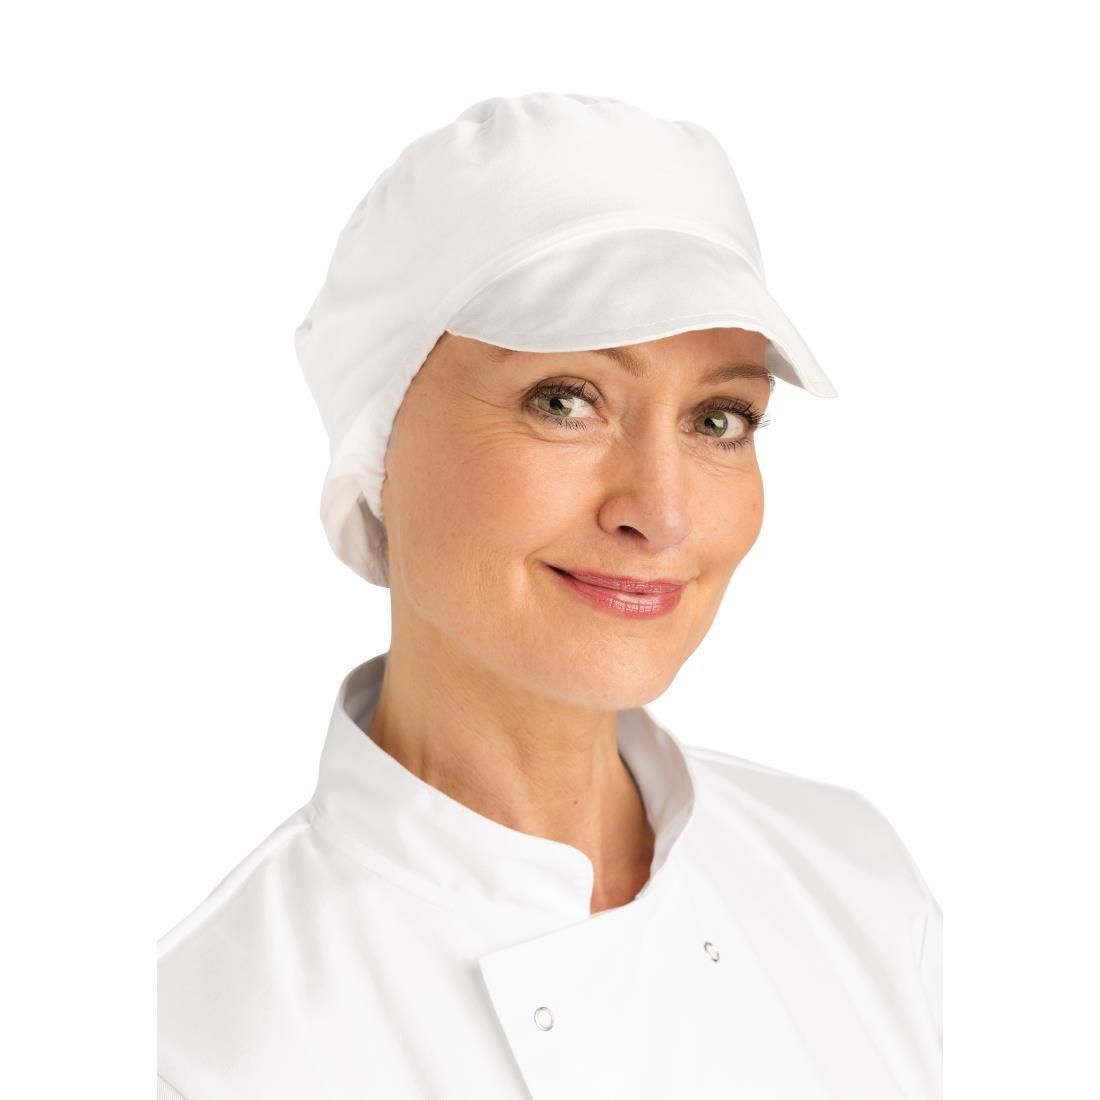 Whites Unisex Bakers Cap with Snood White - A215  - 1